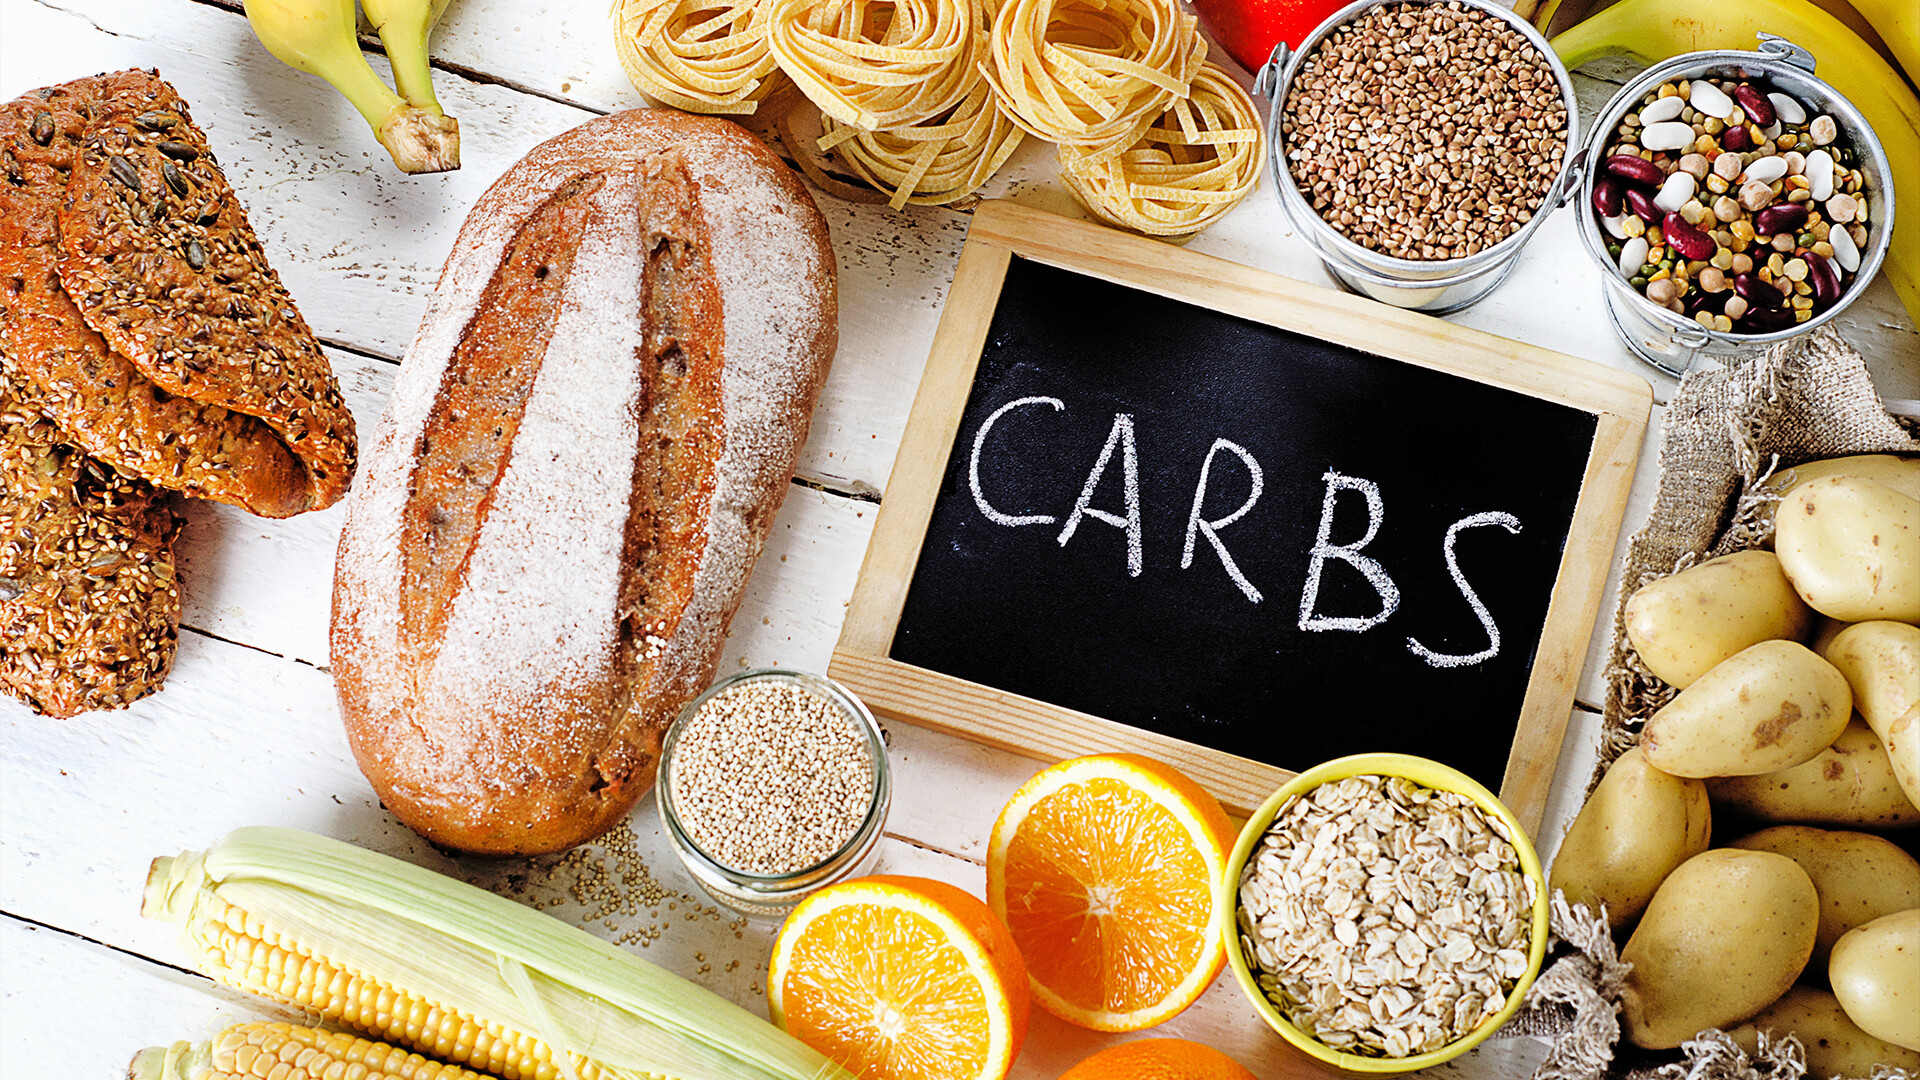 When is it best to consume carbohydrates: before or after training? - ZYCLE